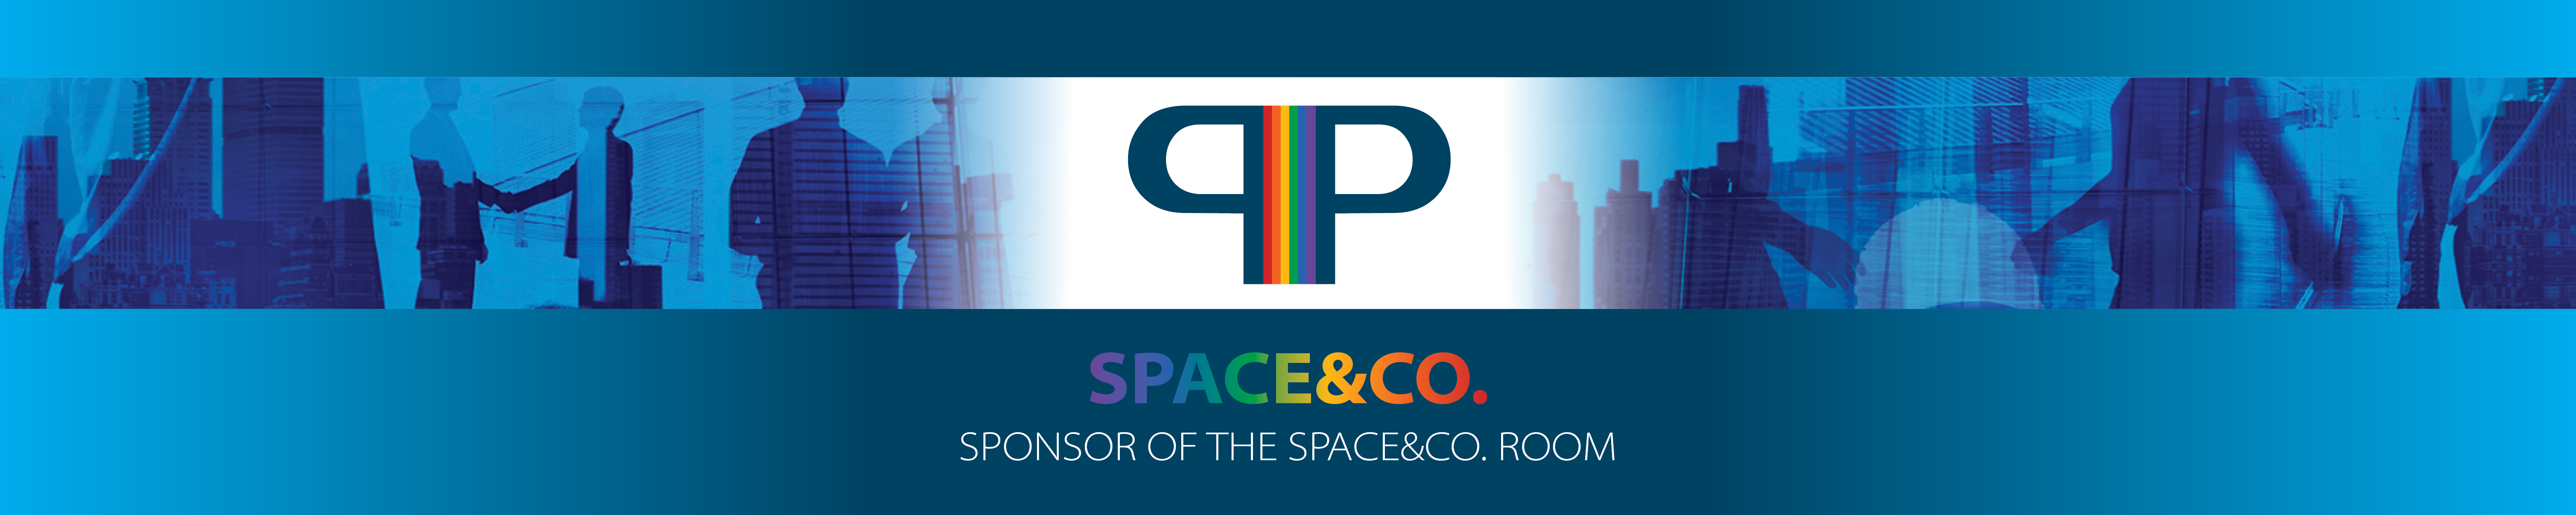 PIP_Conference_Sponsor_SpaceCo